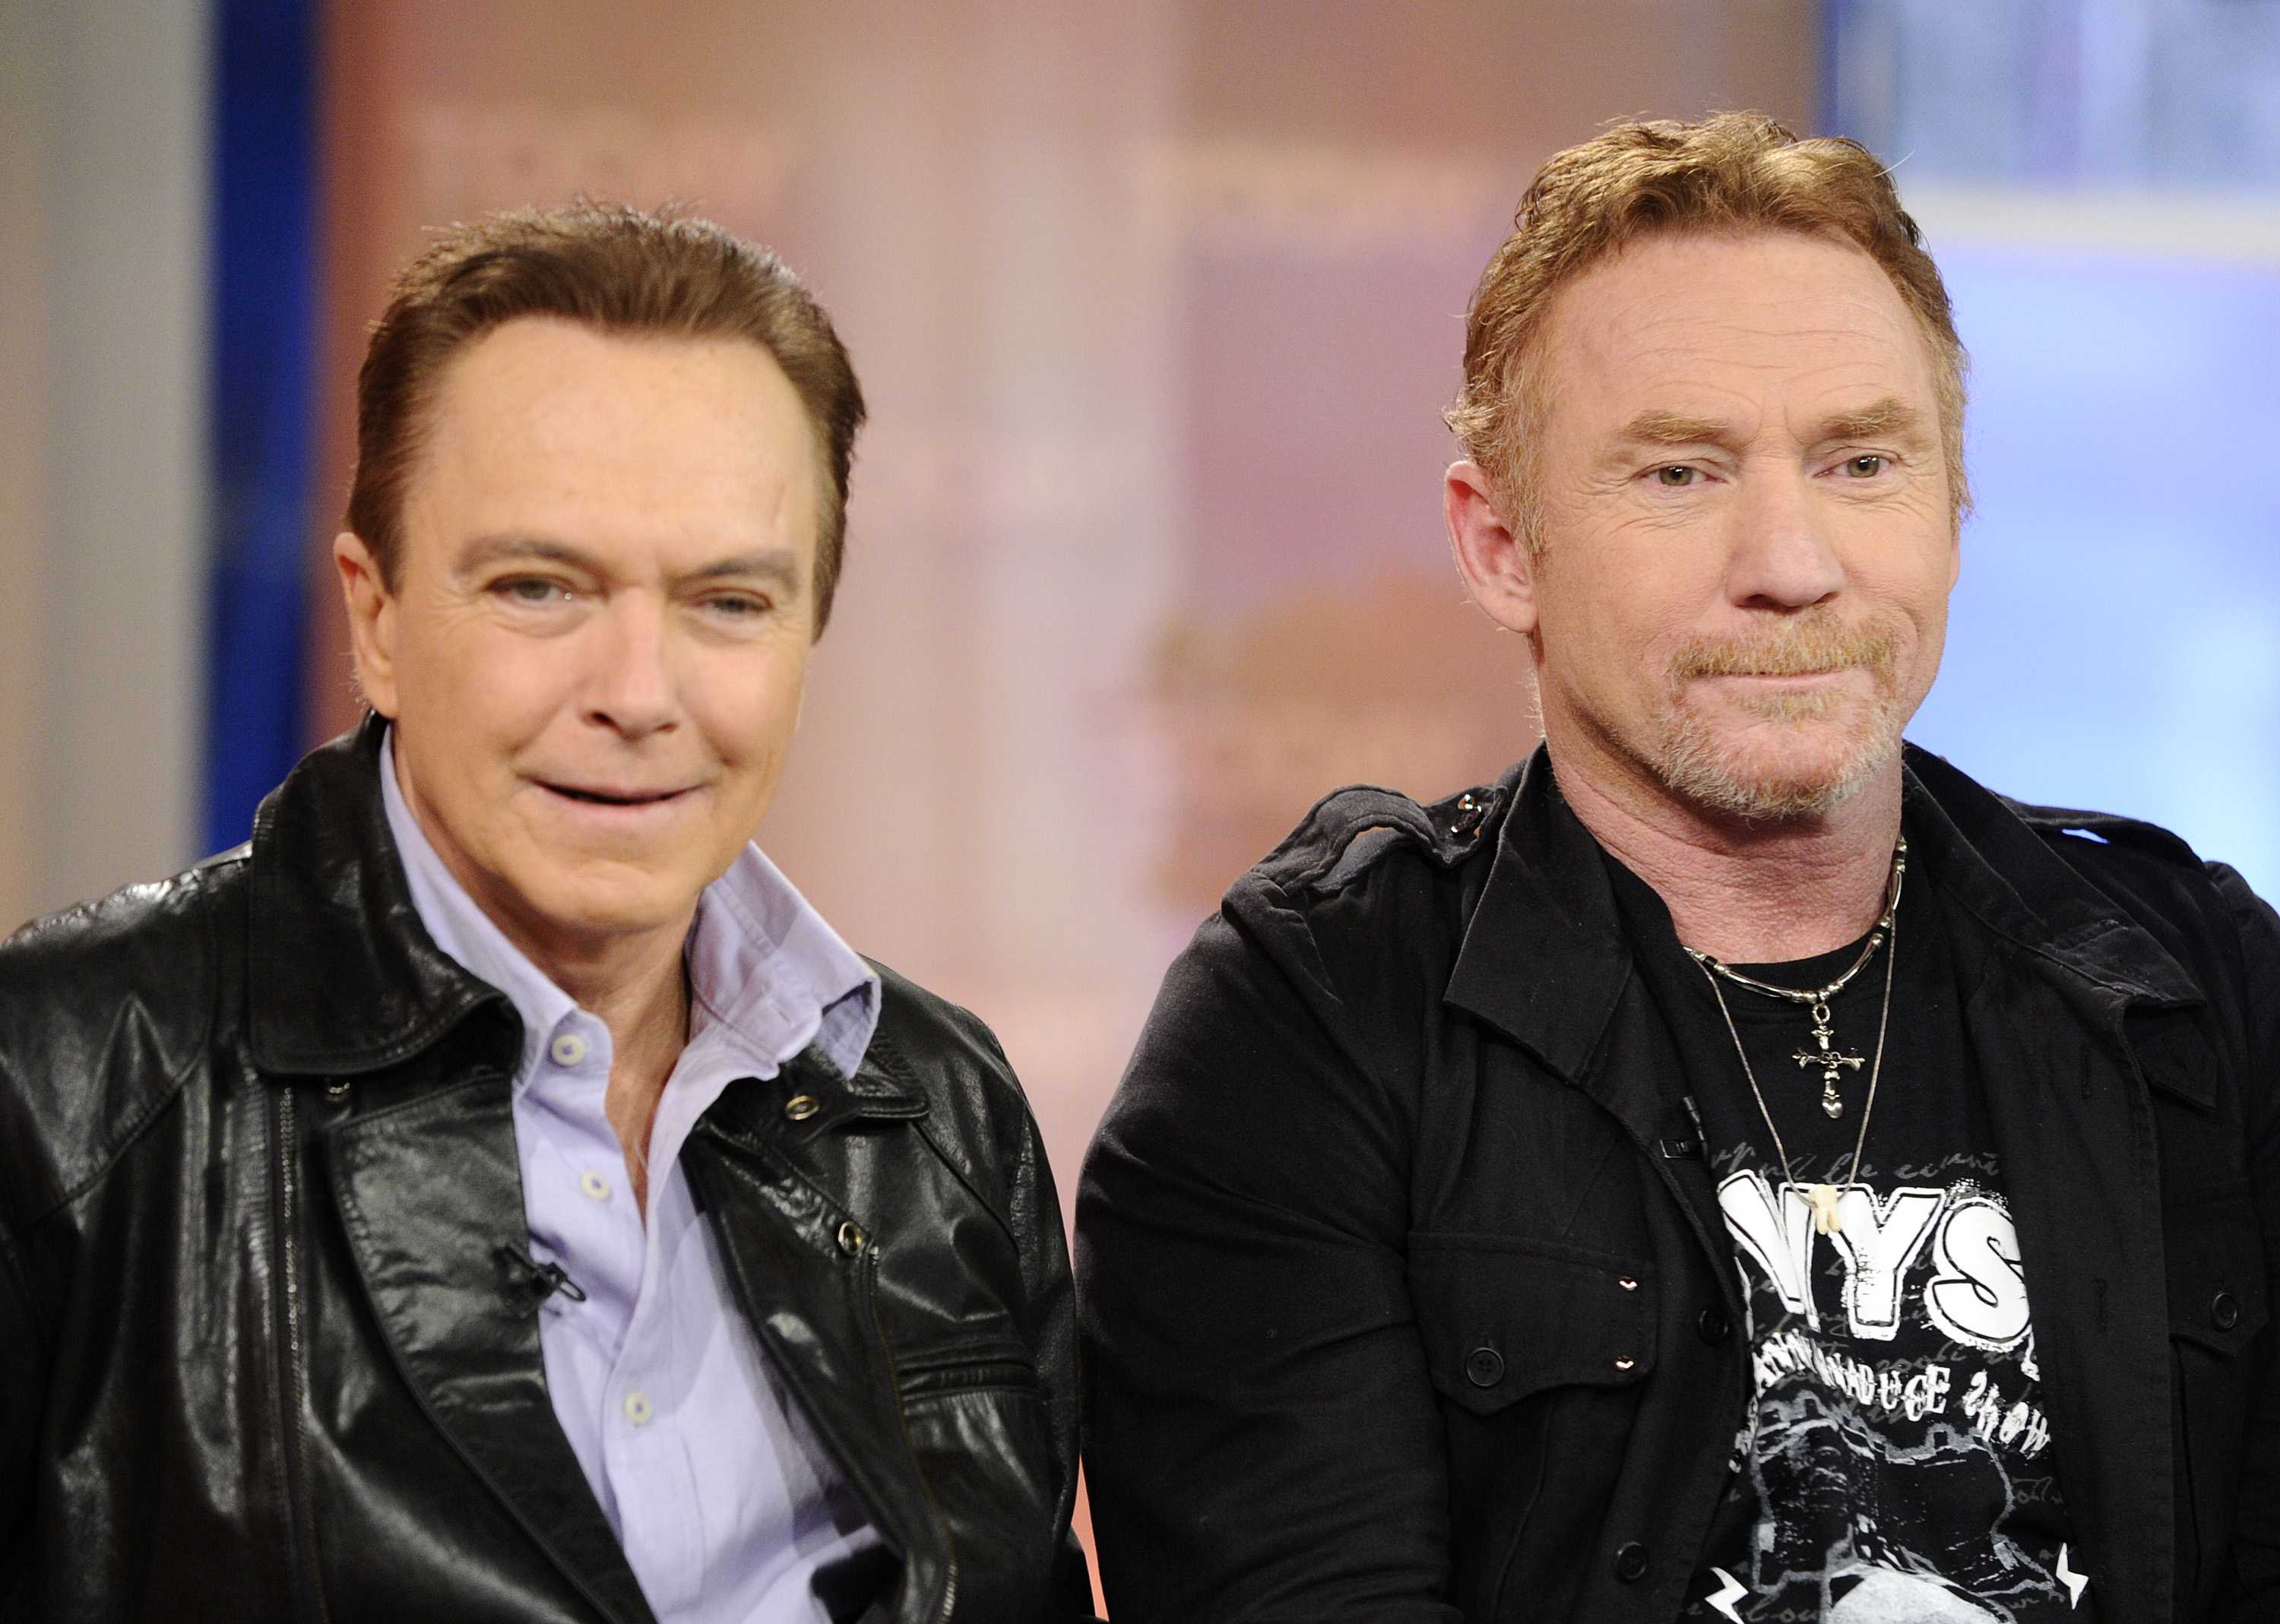 Danny Bonaduce and other celebrities pay tribute to David Cassidy